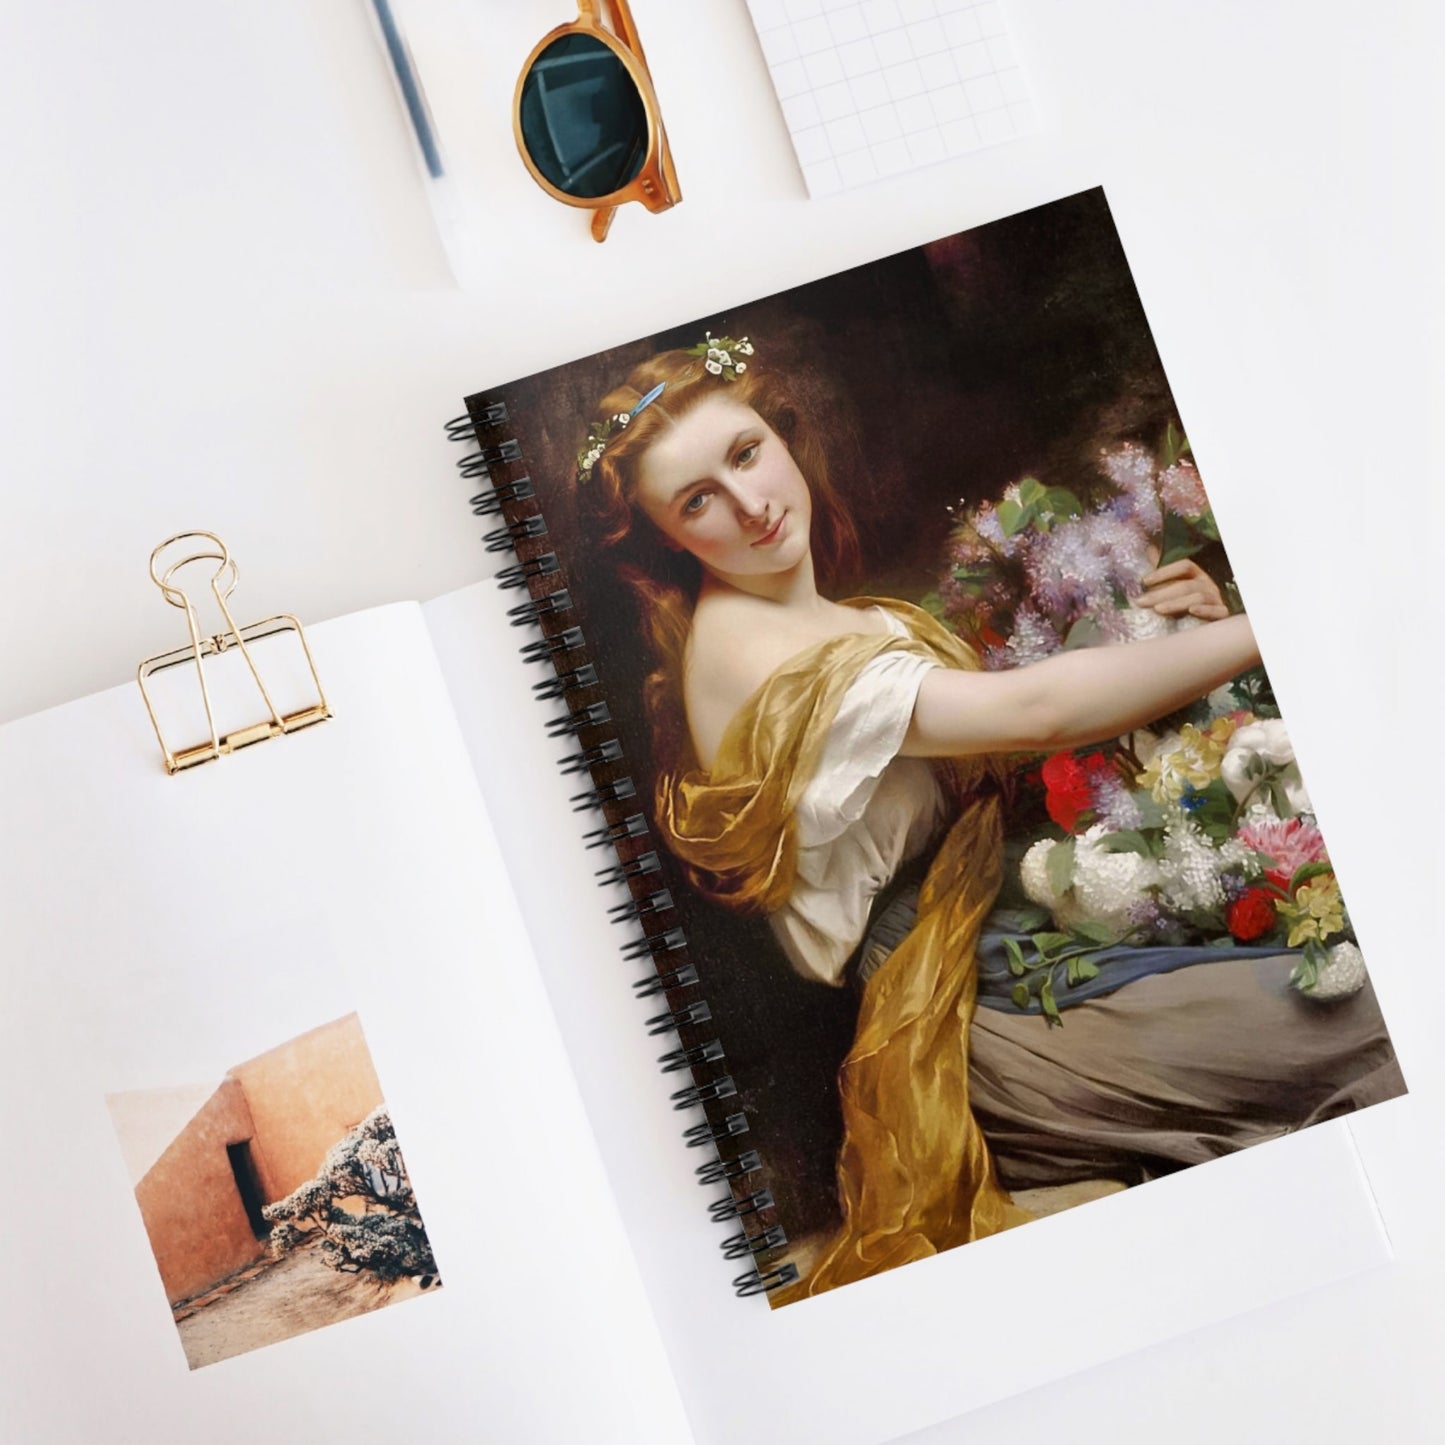 Young Maiden Spiral Notebook Displayed on Desk